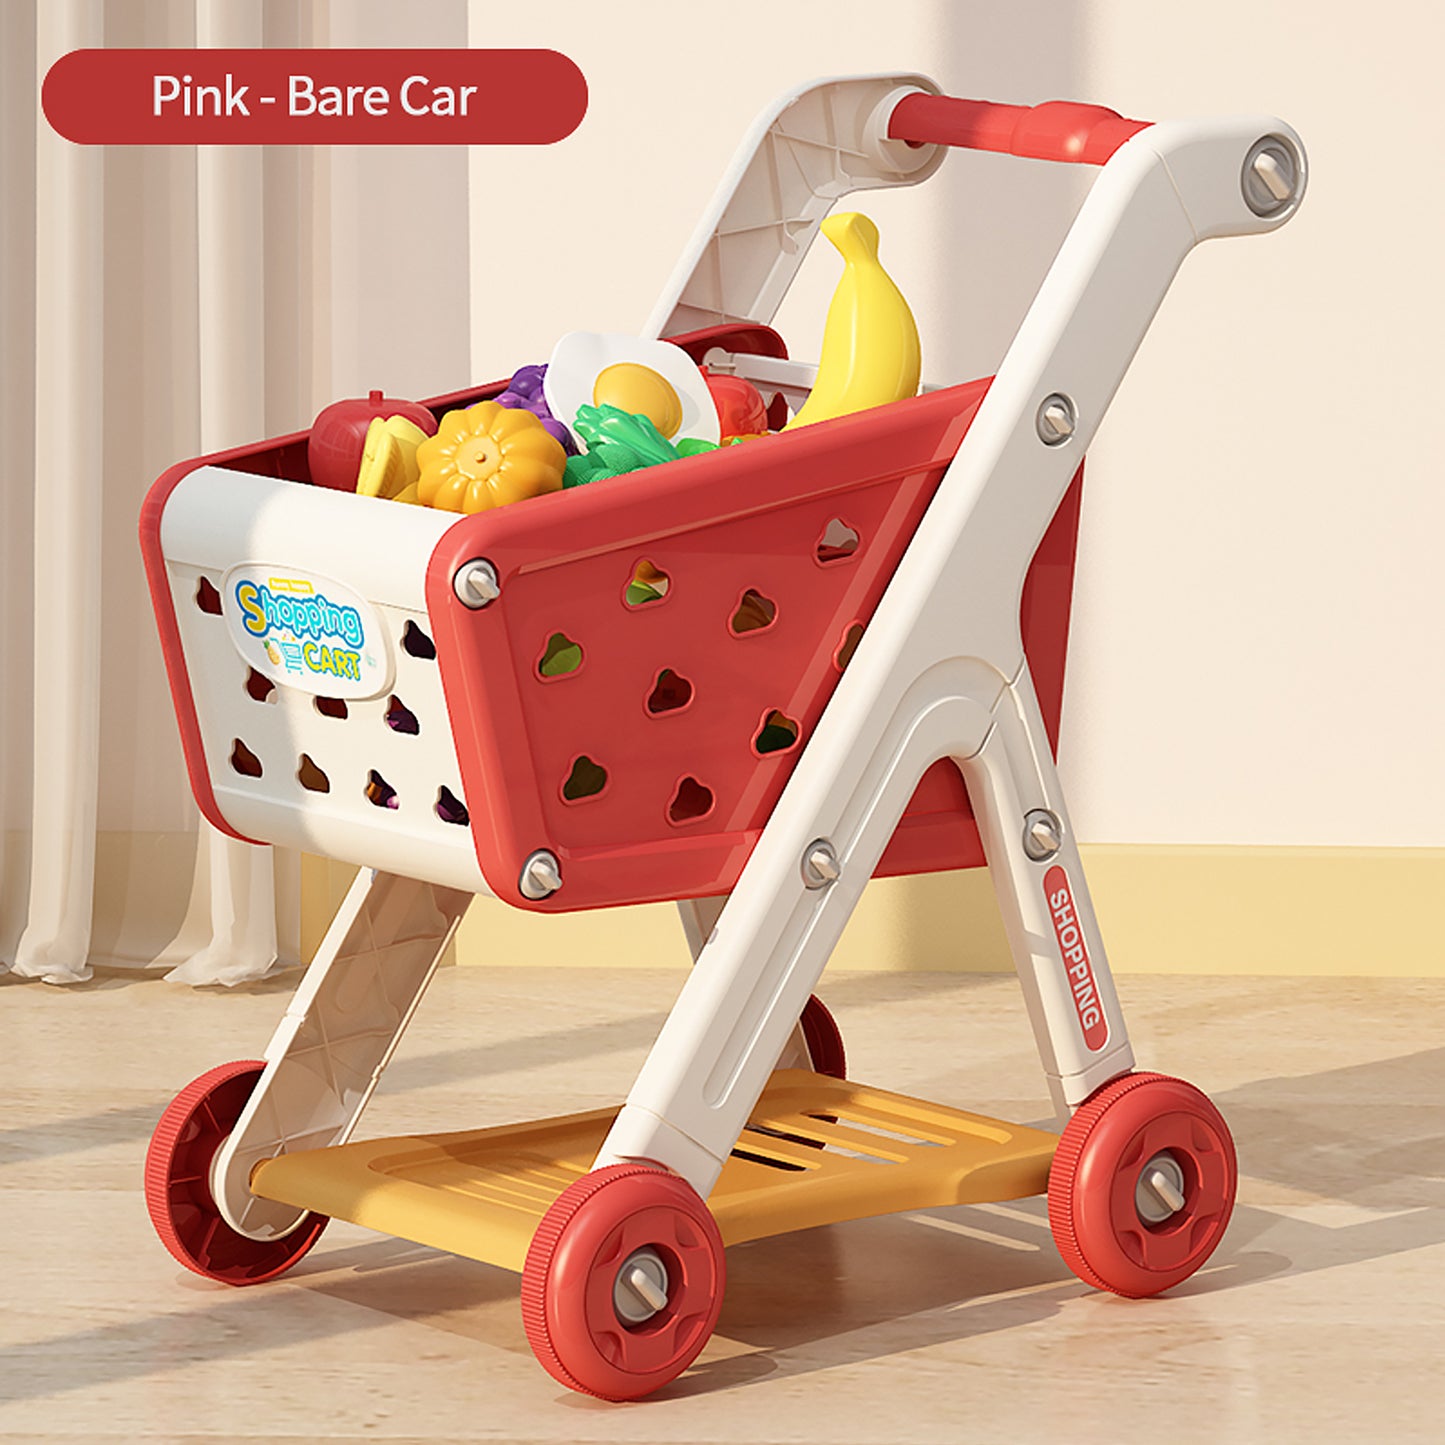 Shop and Play: Kids' Shopping Cart Toy with Fruit Cutting and Kitchen Playset